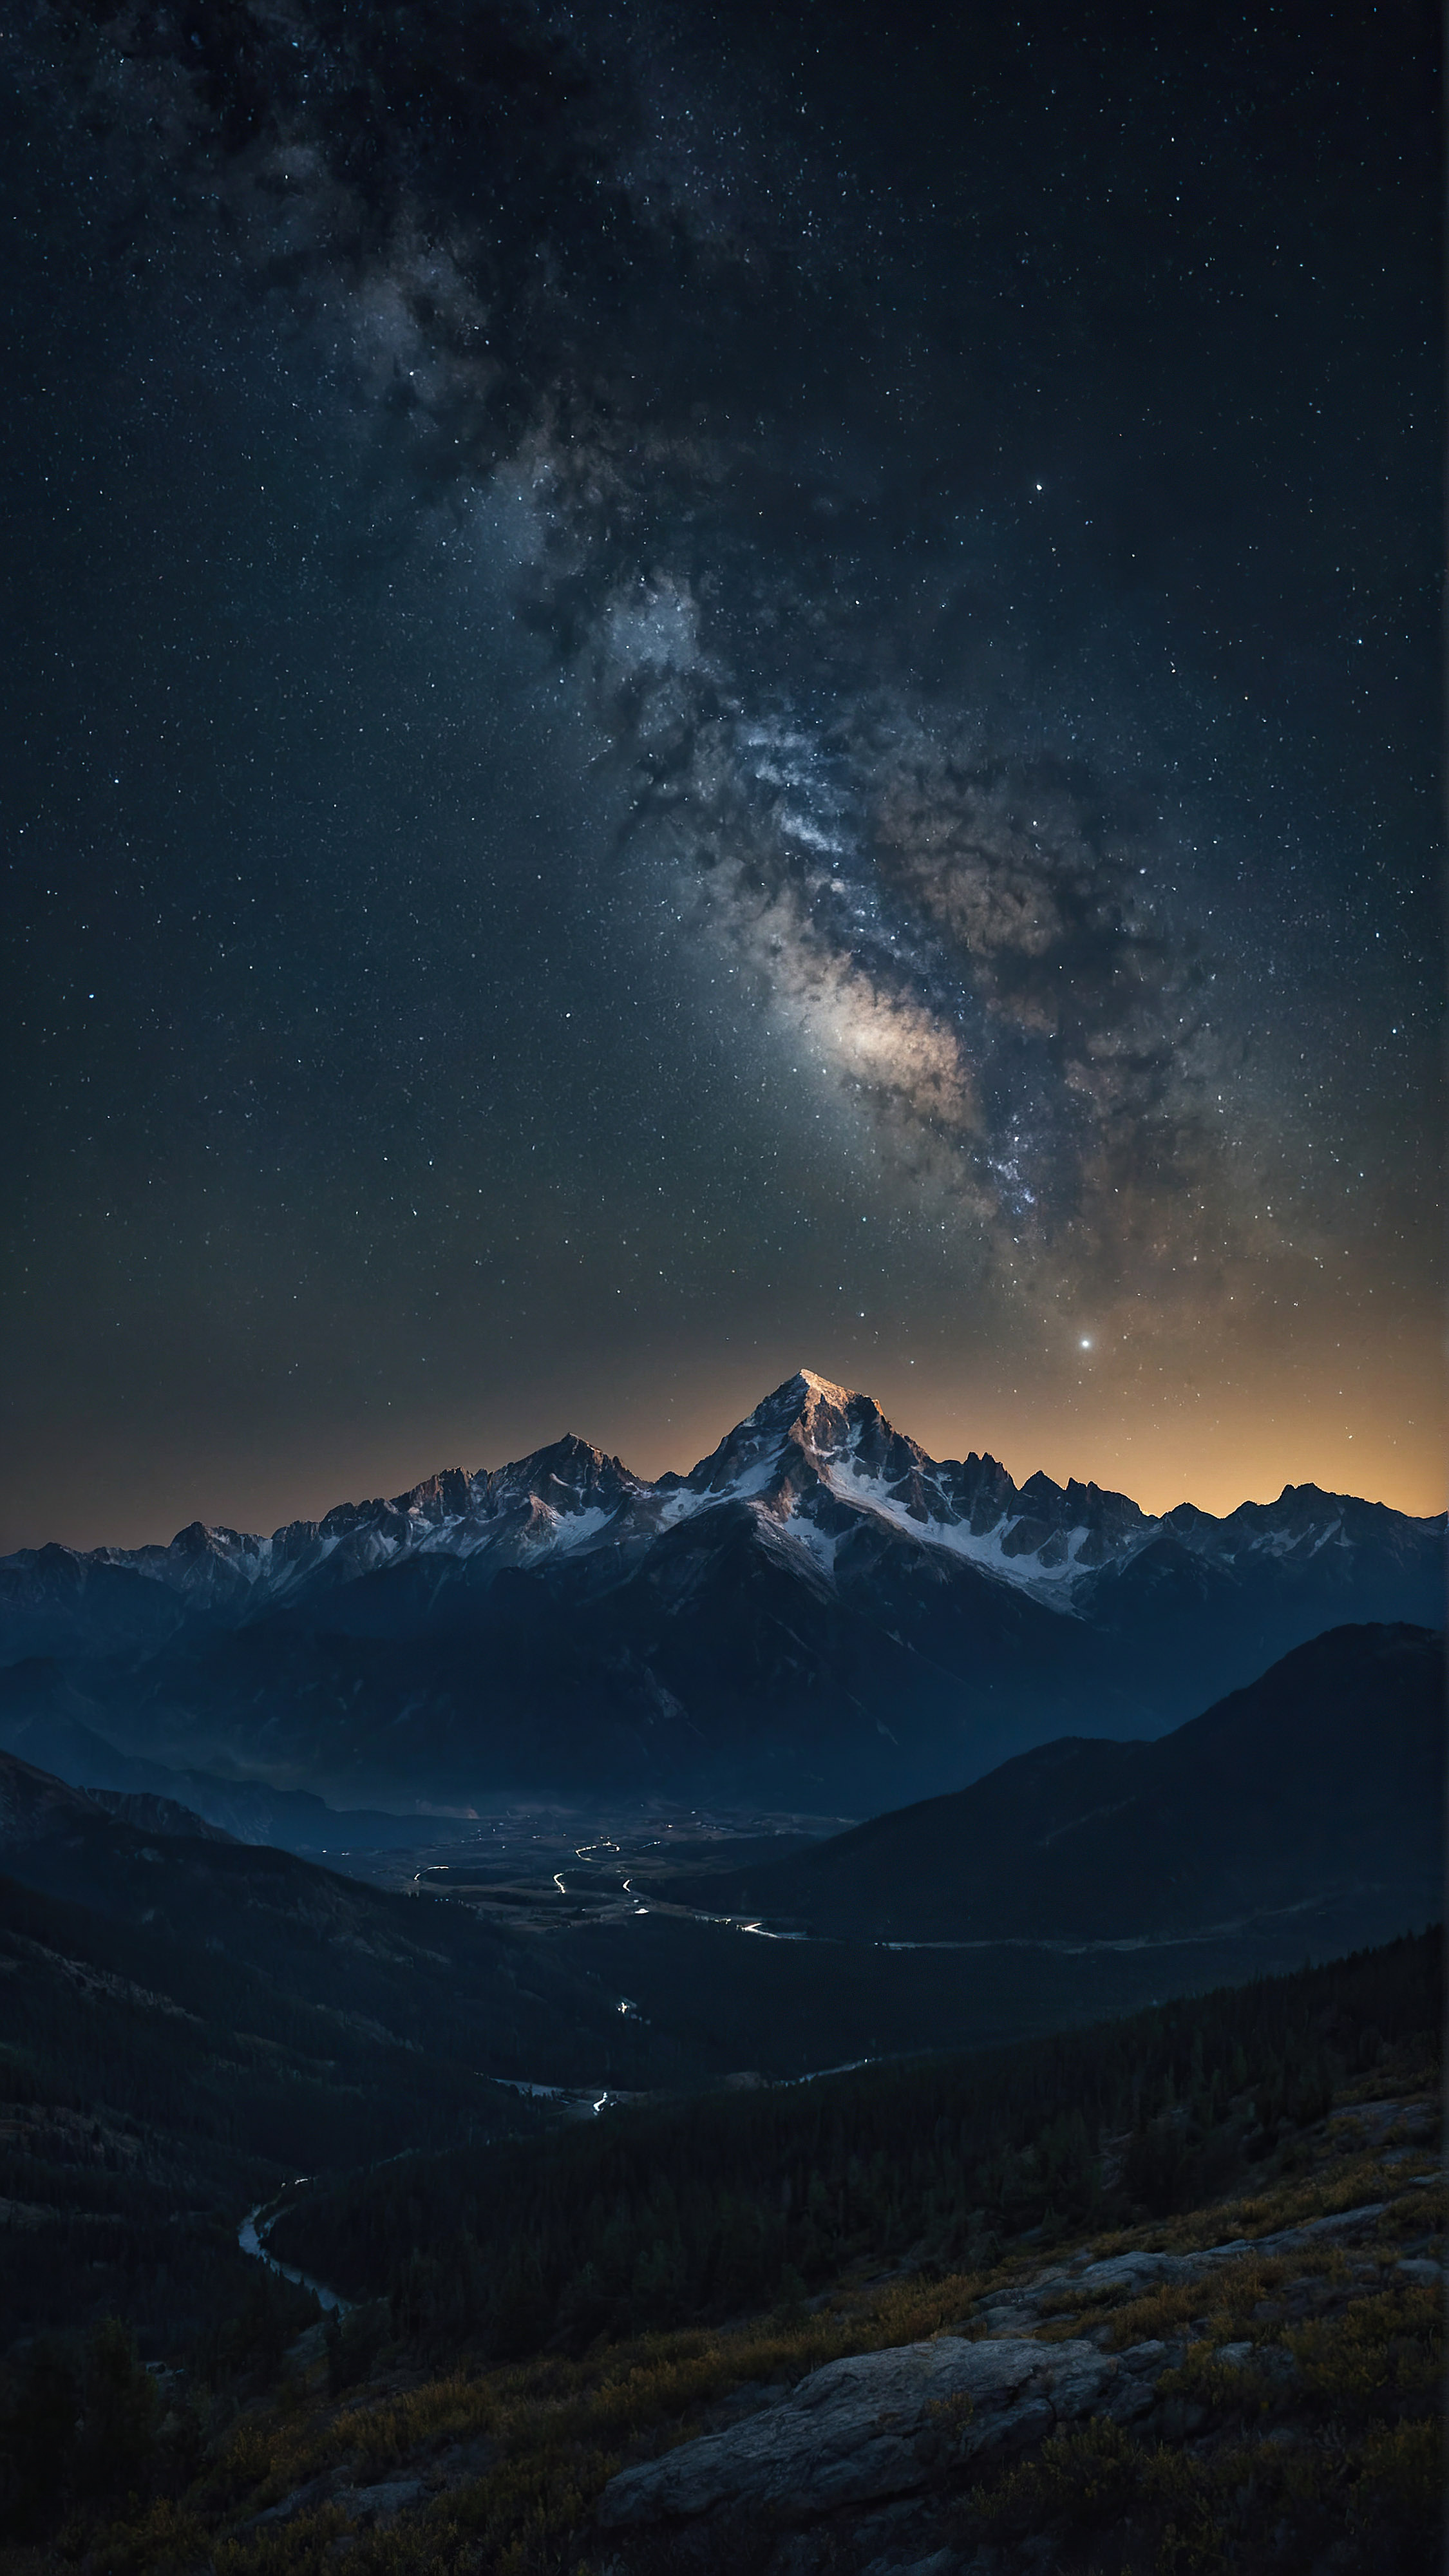 Download this iPhone wallpaper in 4K for free, capturing a breathtaking night scene of a rugged mountain range under a starlit sky, with countless stars adding to the serene and majestic atmosphere of the landscape.